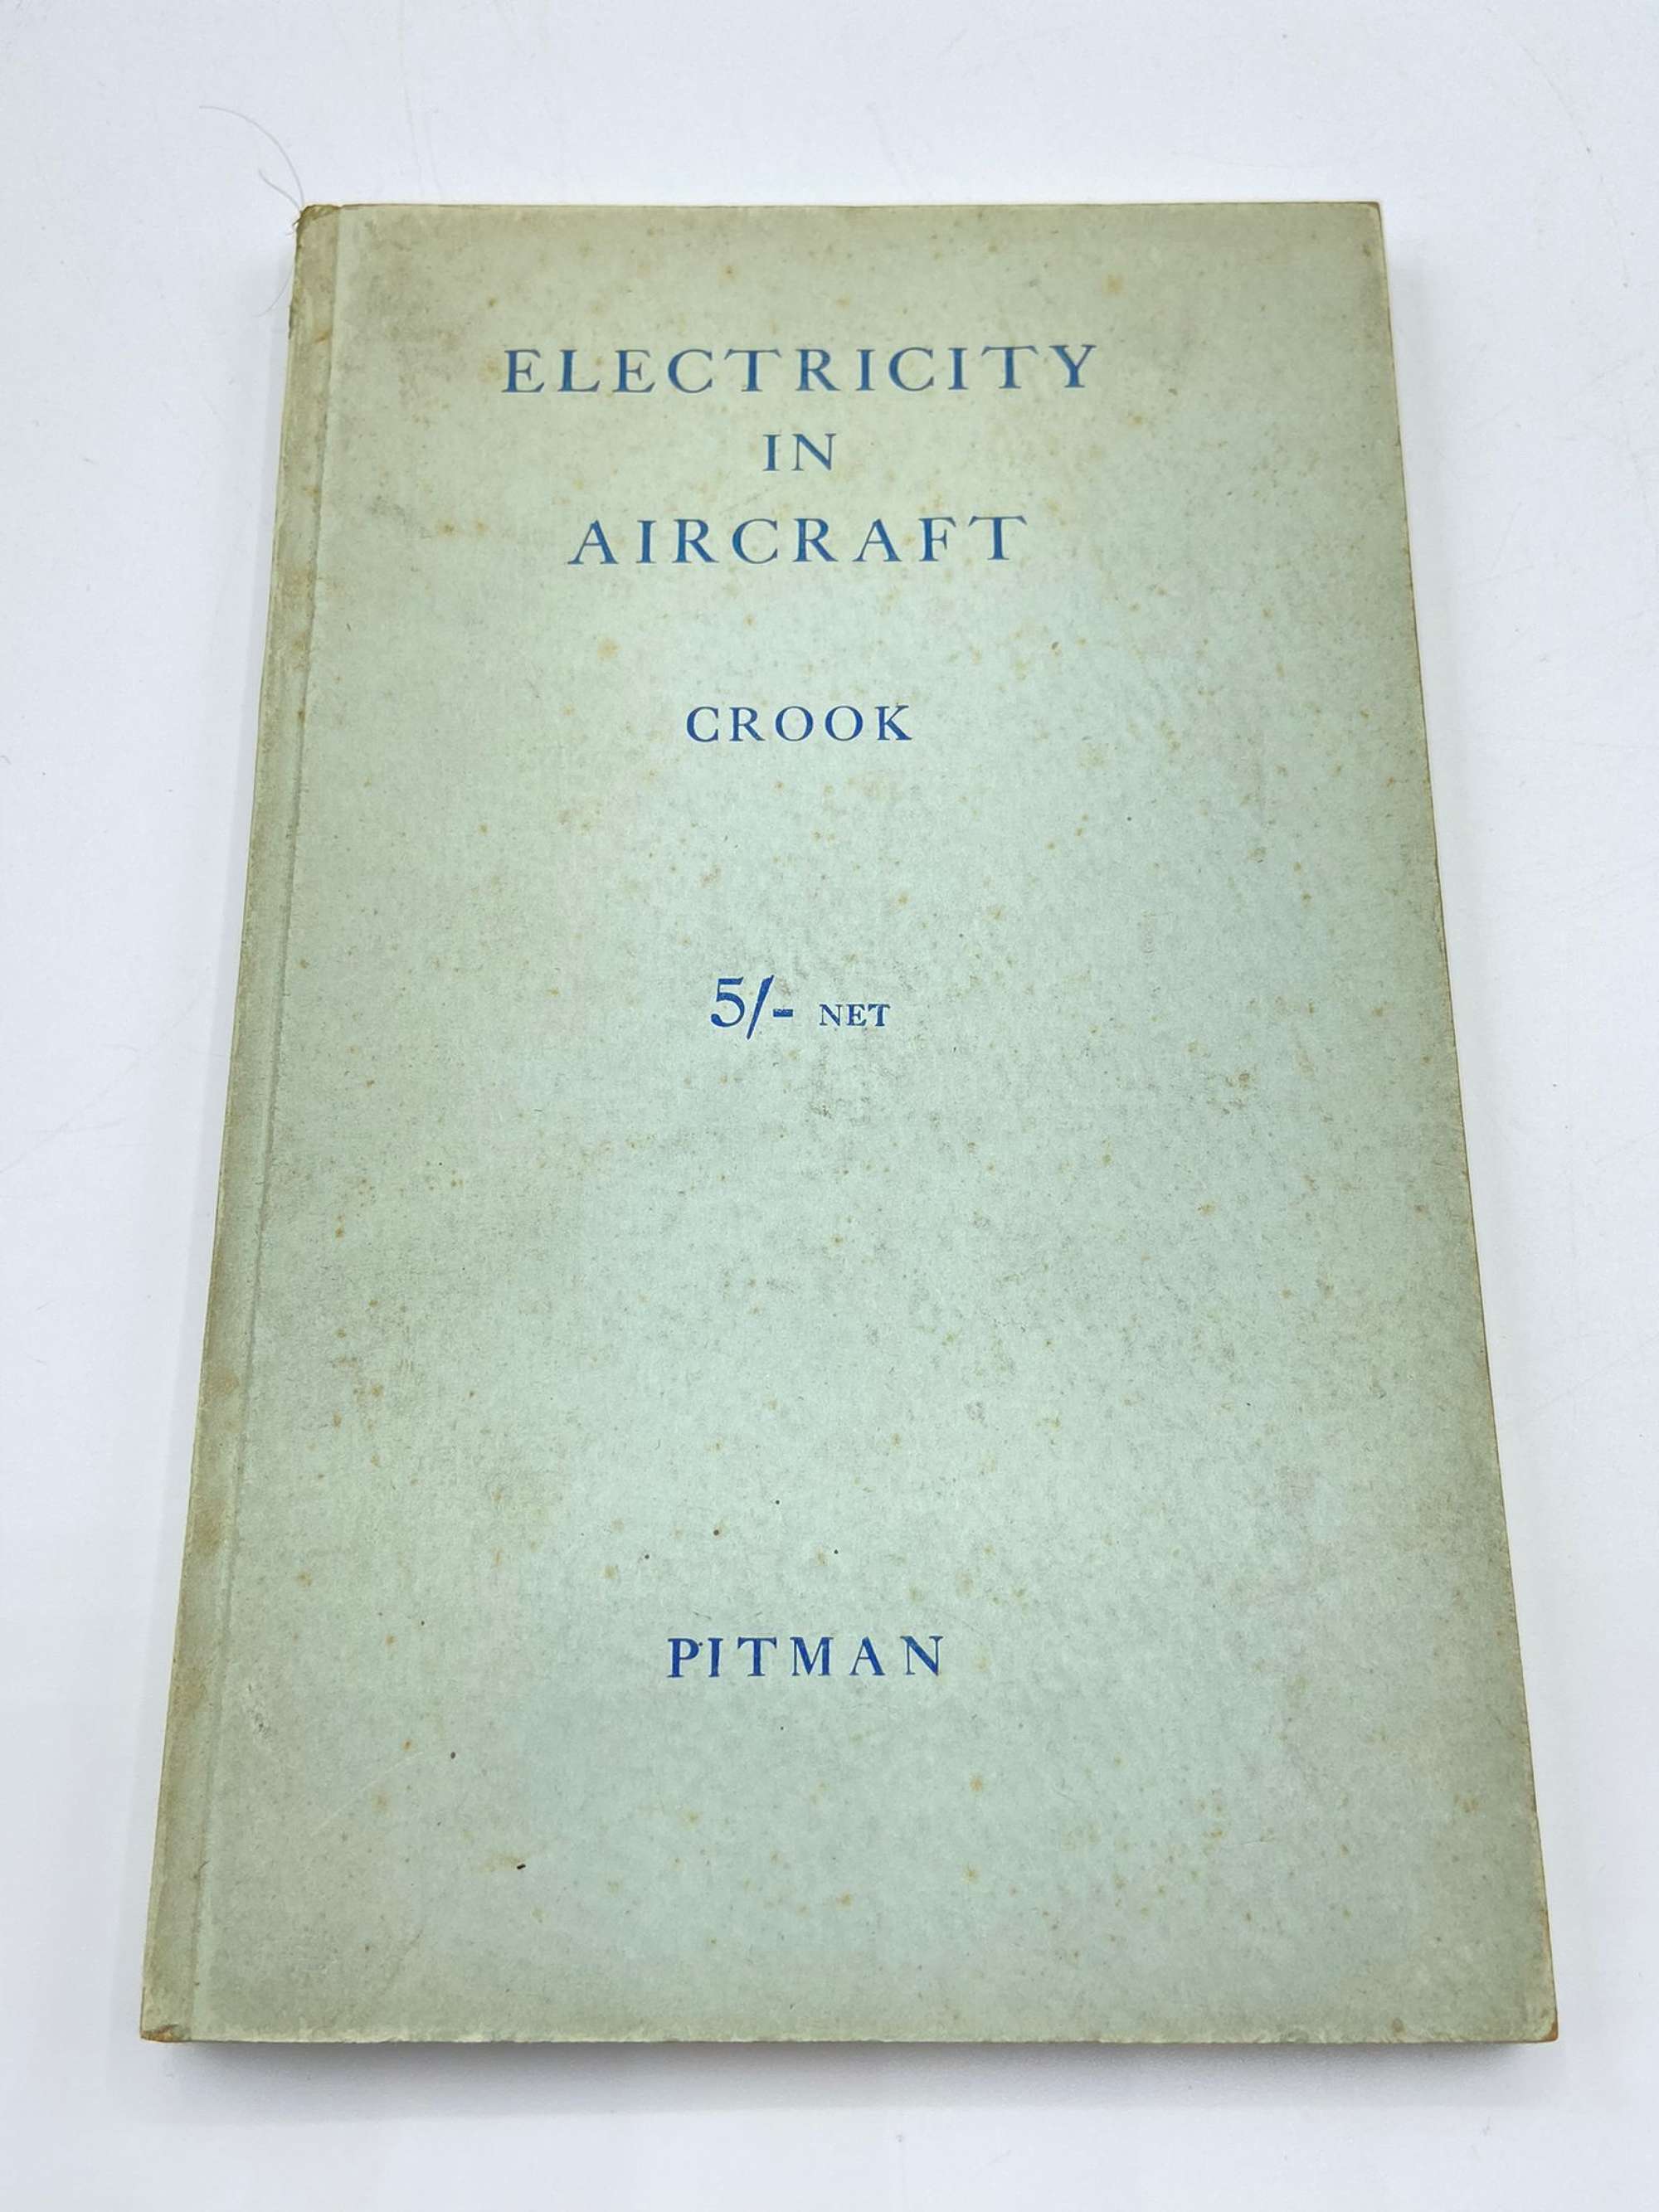 WW2 RAF Training Manuals Electricity In Aircraft PUBLISHED 1940